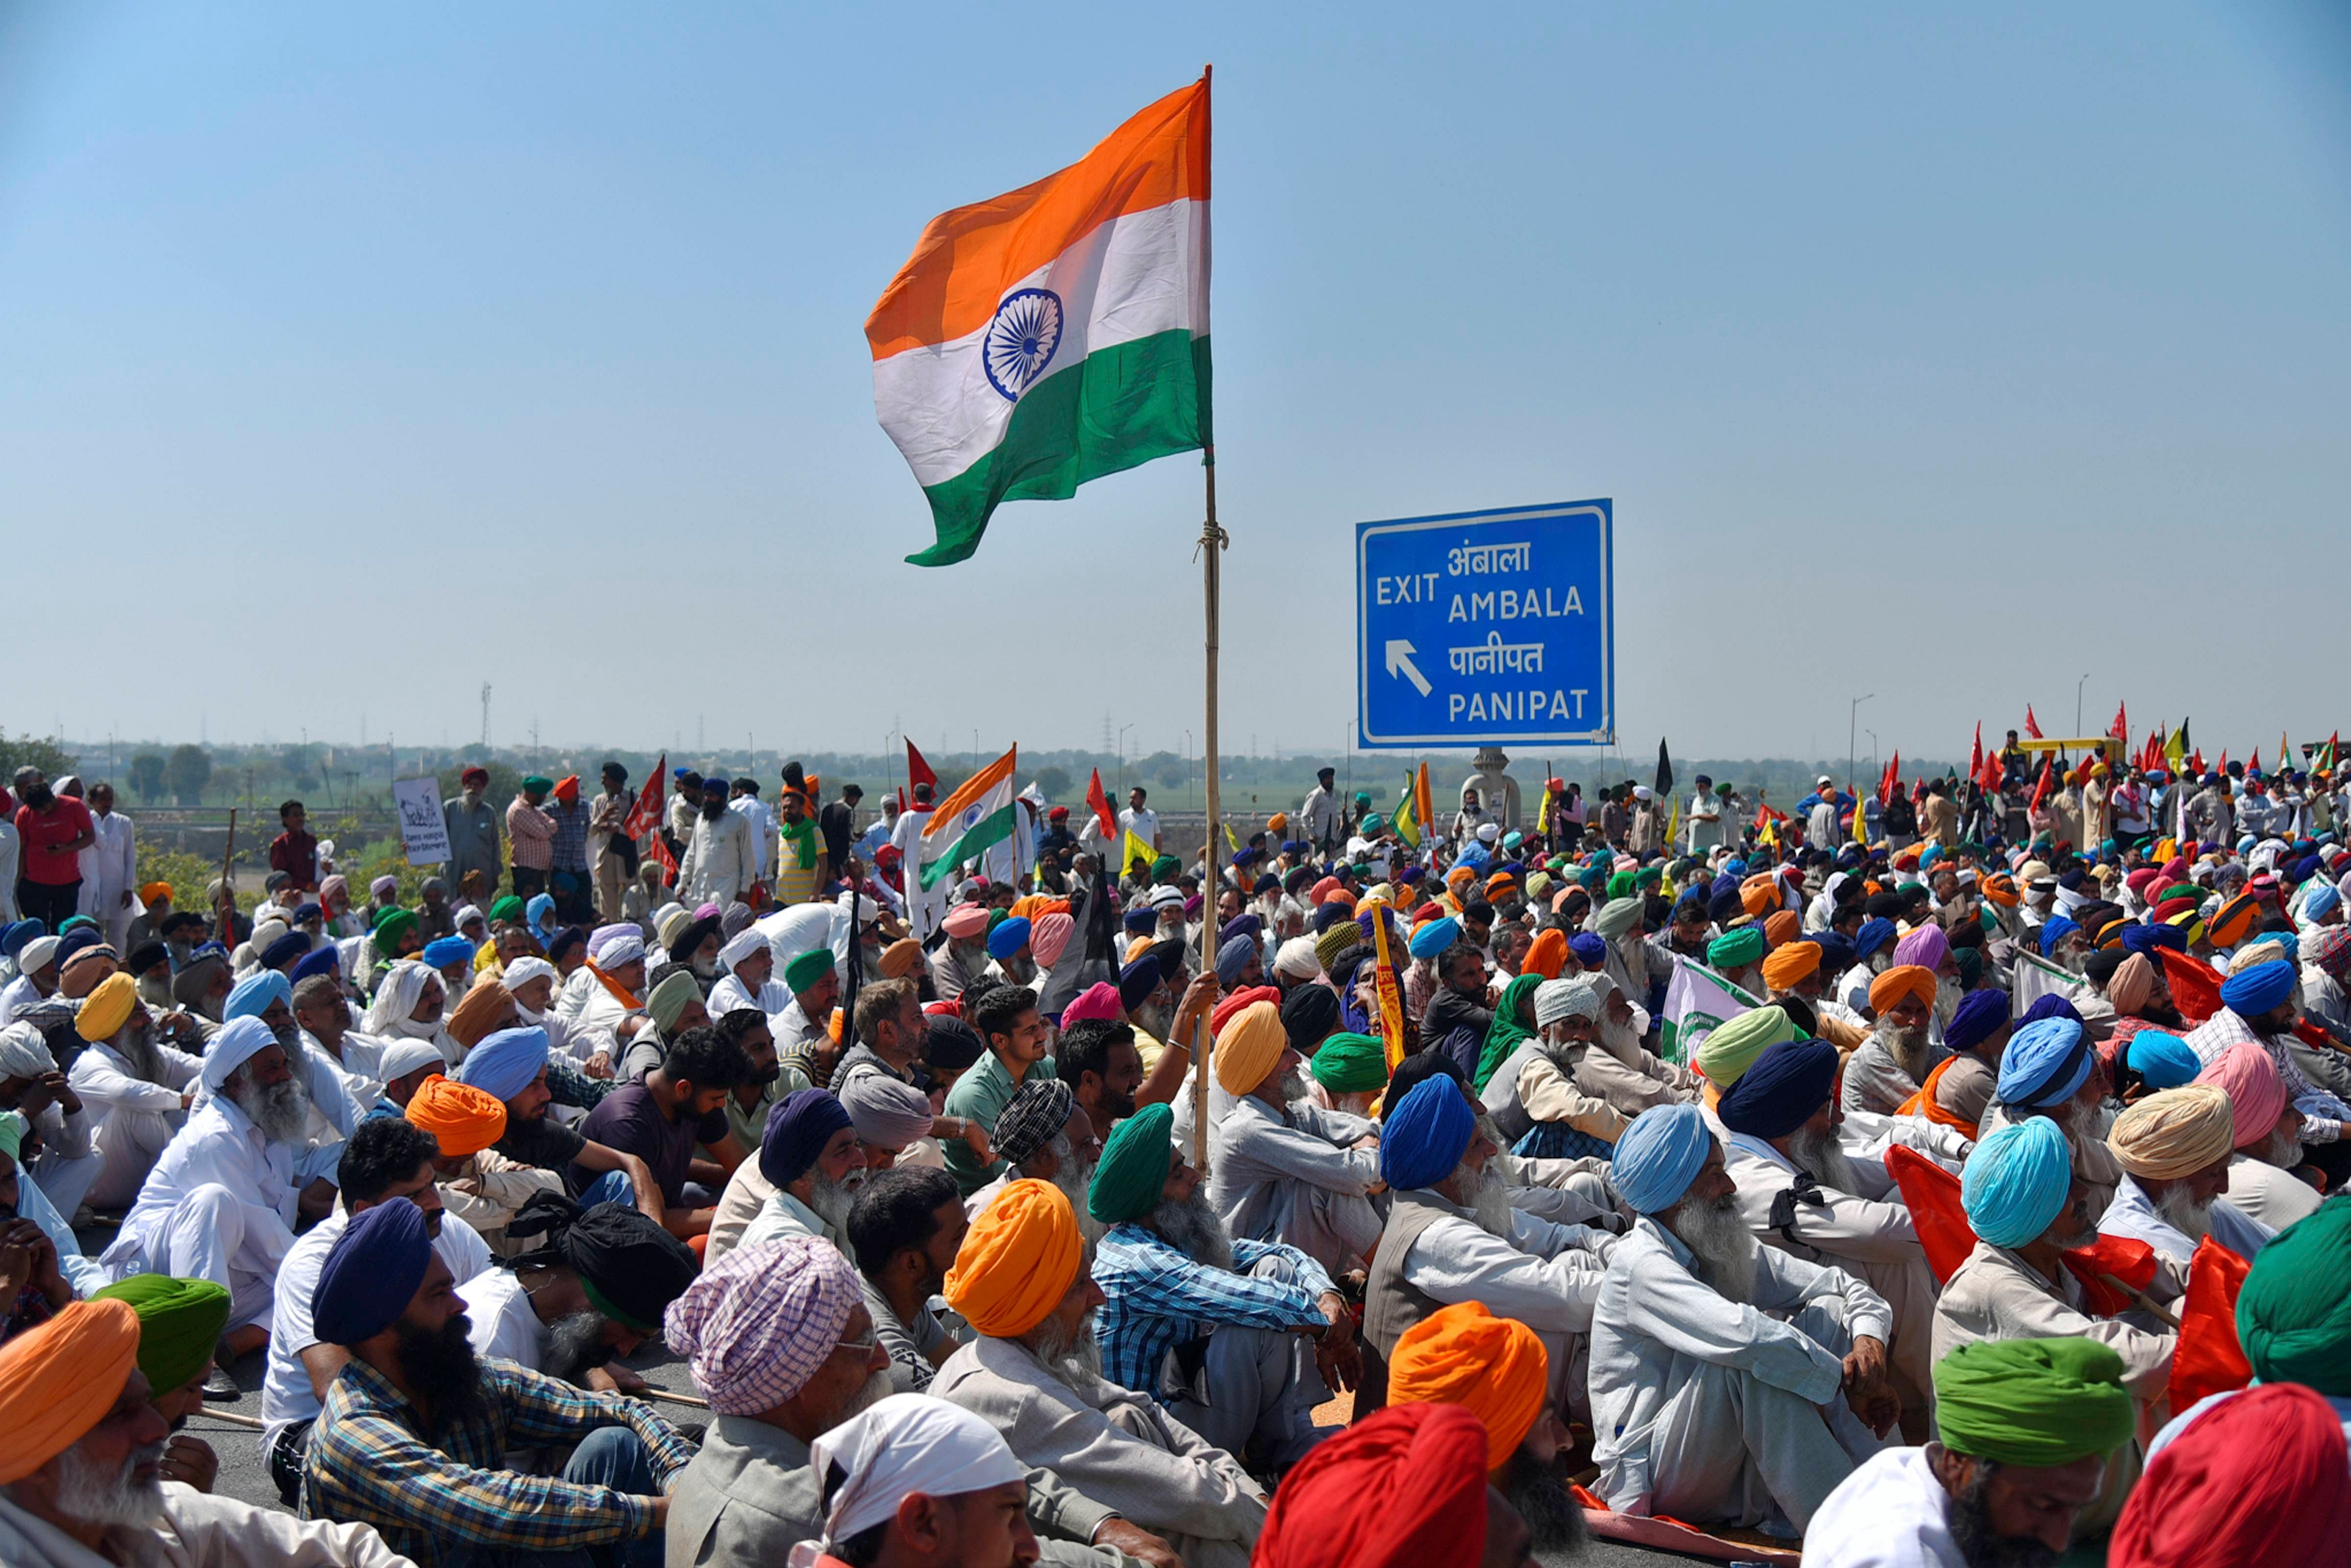 Farmers during 'Kisan Ekta Morcha' to mark the 100th day of the ongoing protests against the new farm reform laws, at KMP Expressway near Kundli in Haryana, Saturday, March 6, 2021. Representative image/Credit: PTI Photo